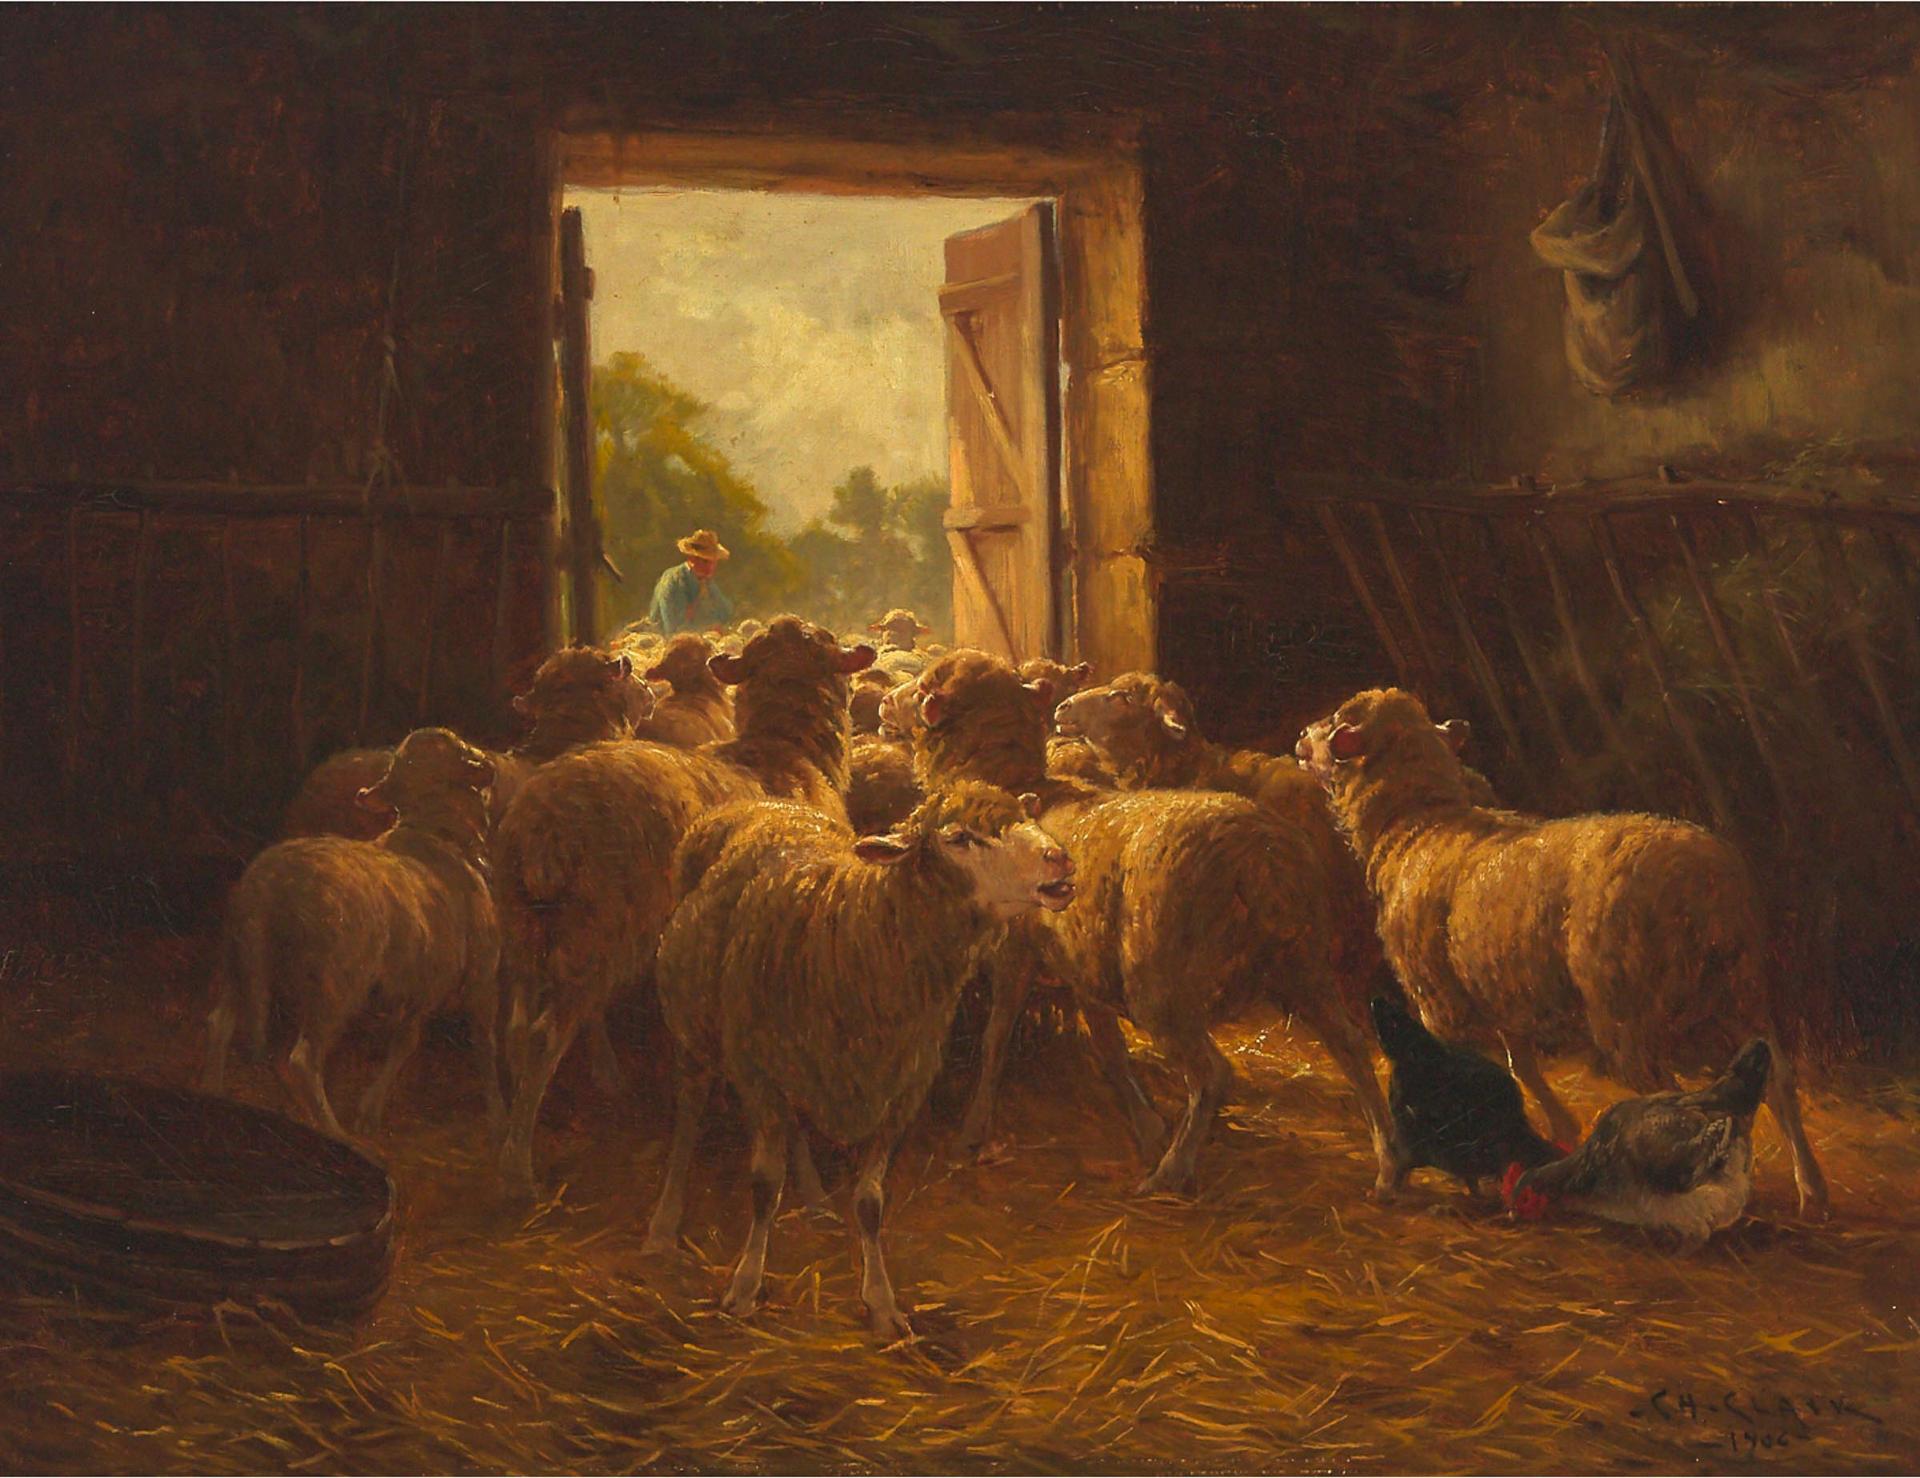 Charles H. Clair (1860-1930) - Sheep And Poultry In A Barn Being Led By The Farmer, 1906